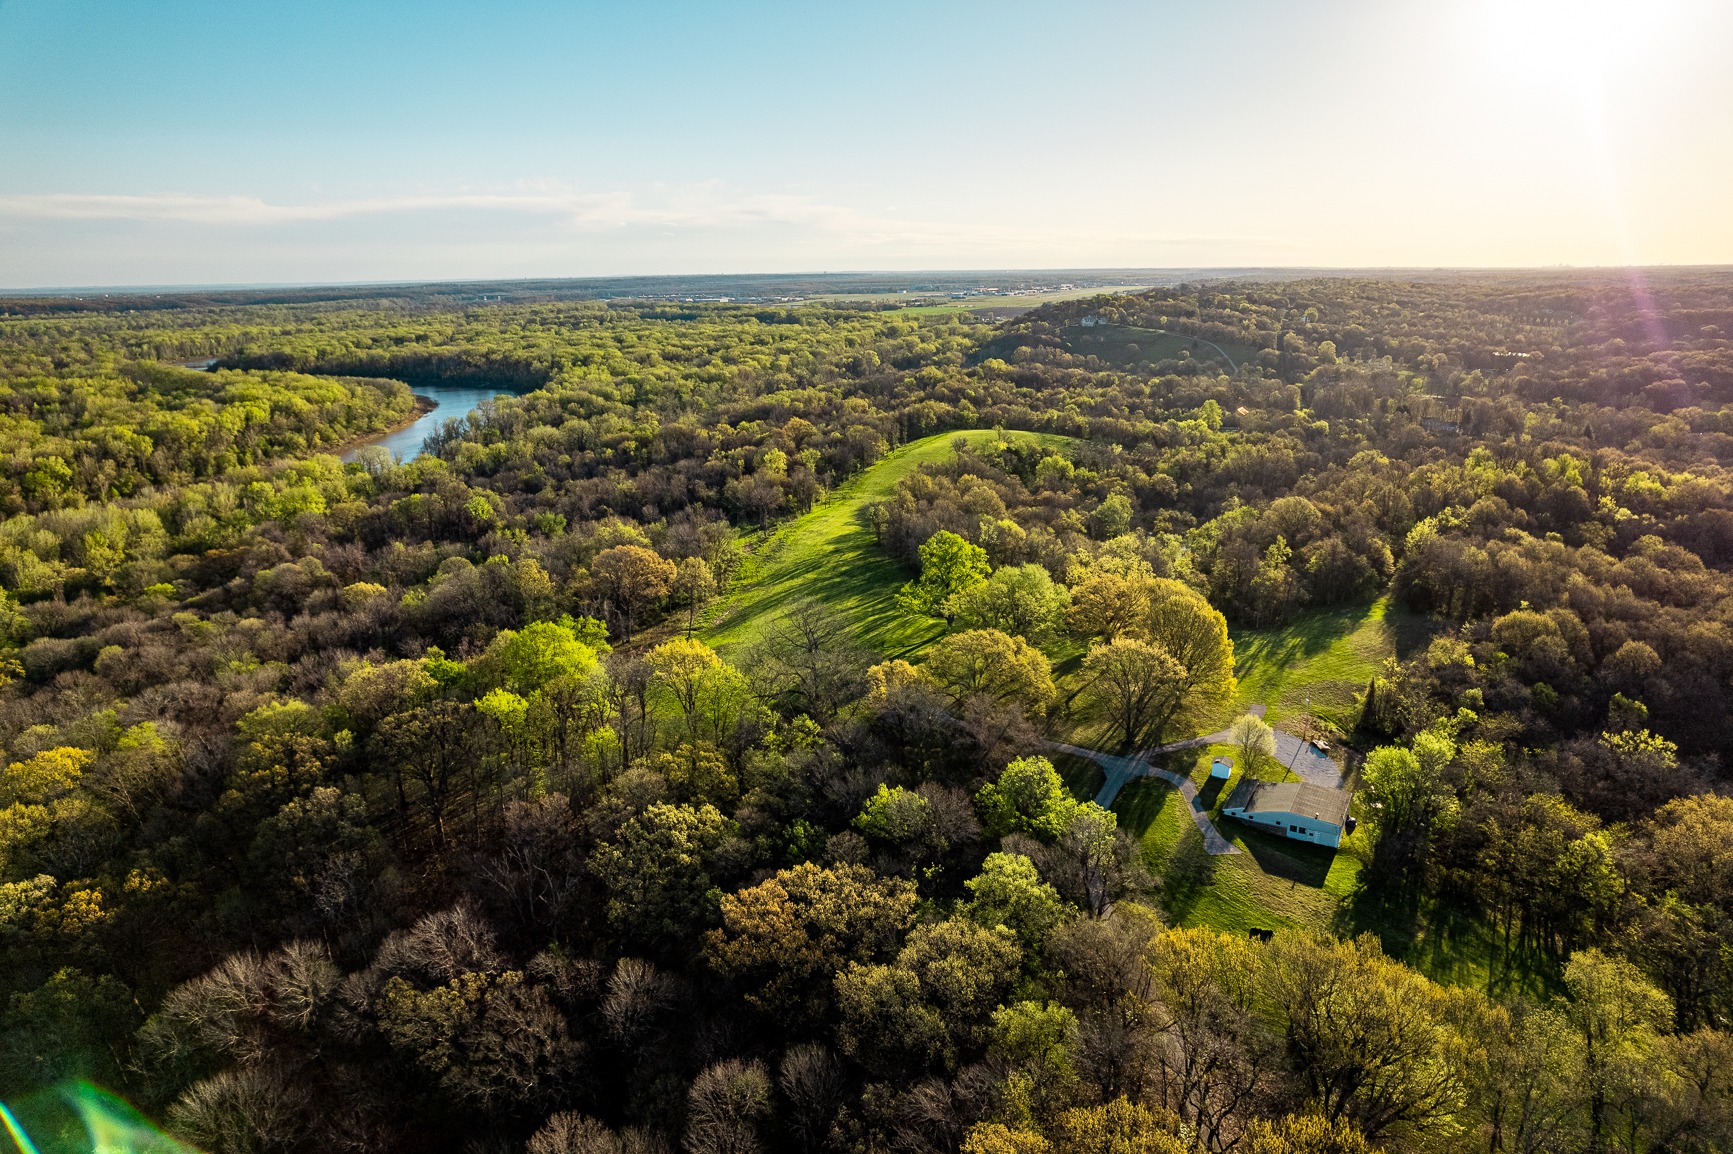 276.6 Acre Estate with Stunning Missouri River Valley Views for Sale Ã¢ St. Louis County